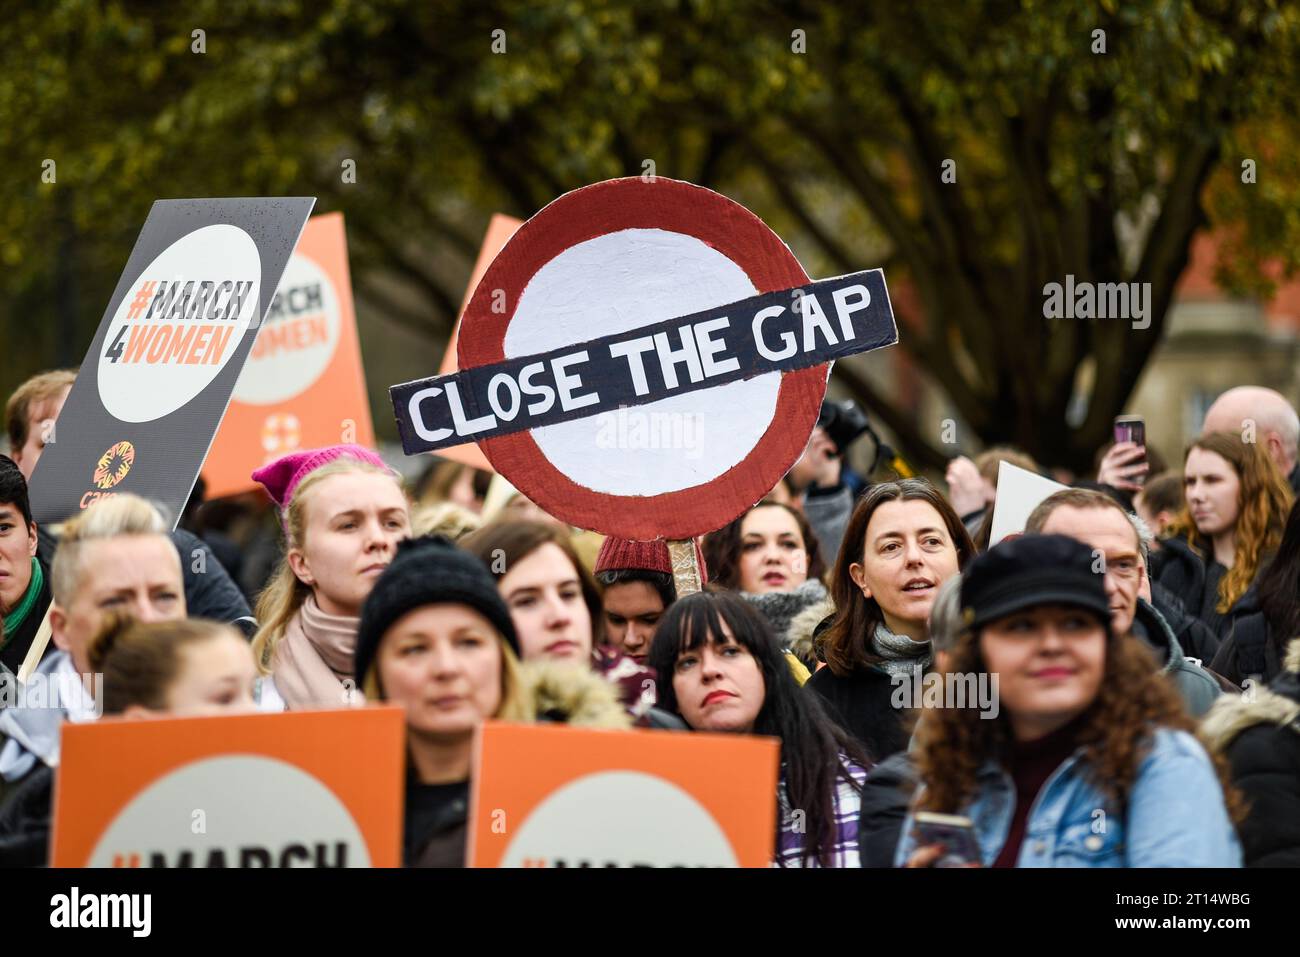 Close the Gap sign at the March 4 Women women's equality protest organised by Care International in London, UK. Gender pay gap placard Stock Photo